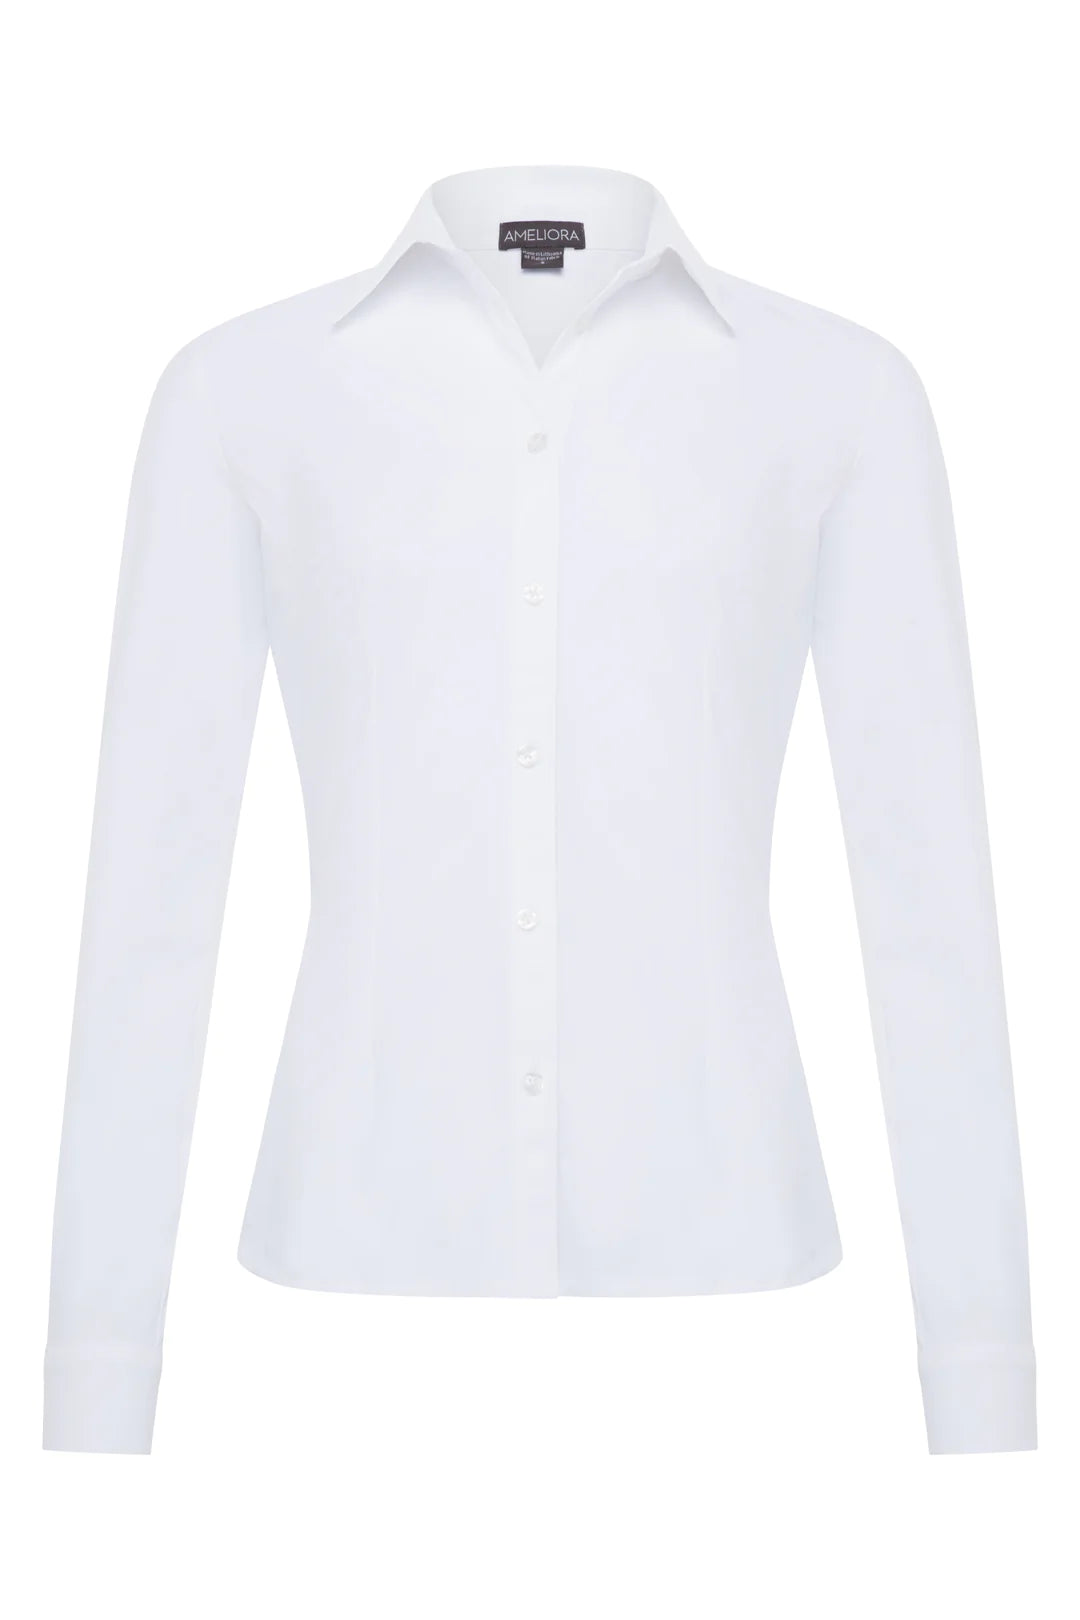 THE DAWN FITTED BUTTON UP SHIRT IN WHITE